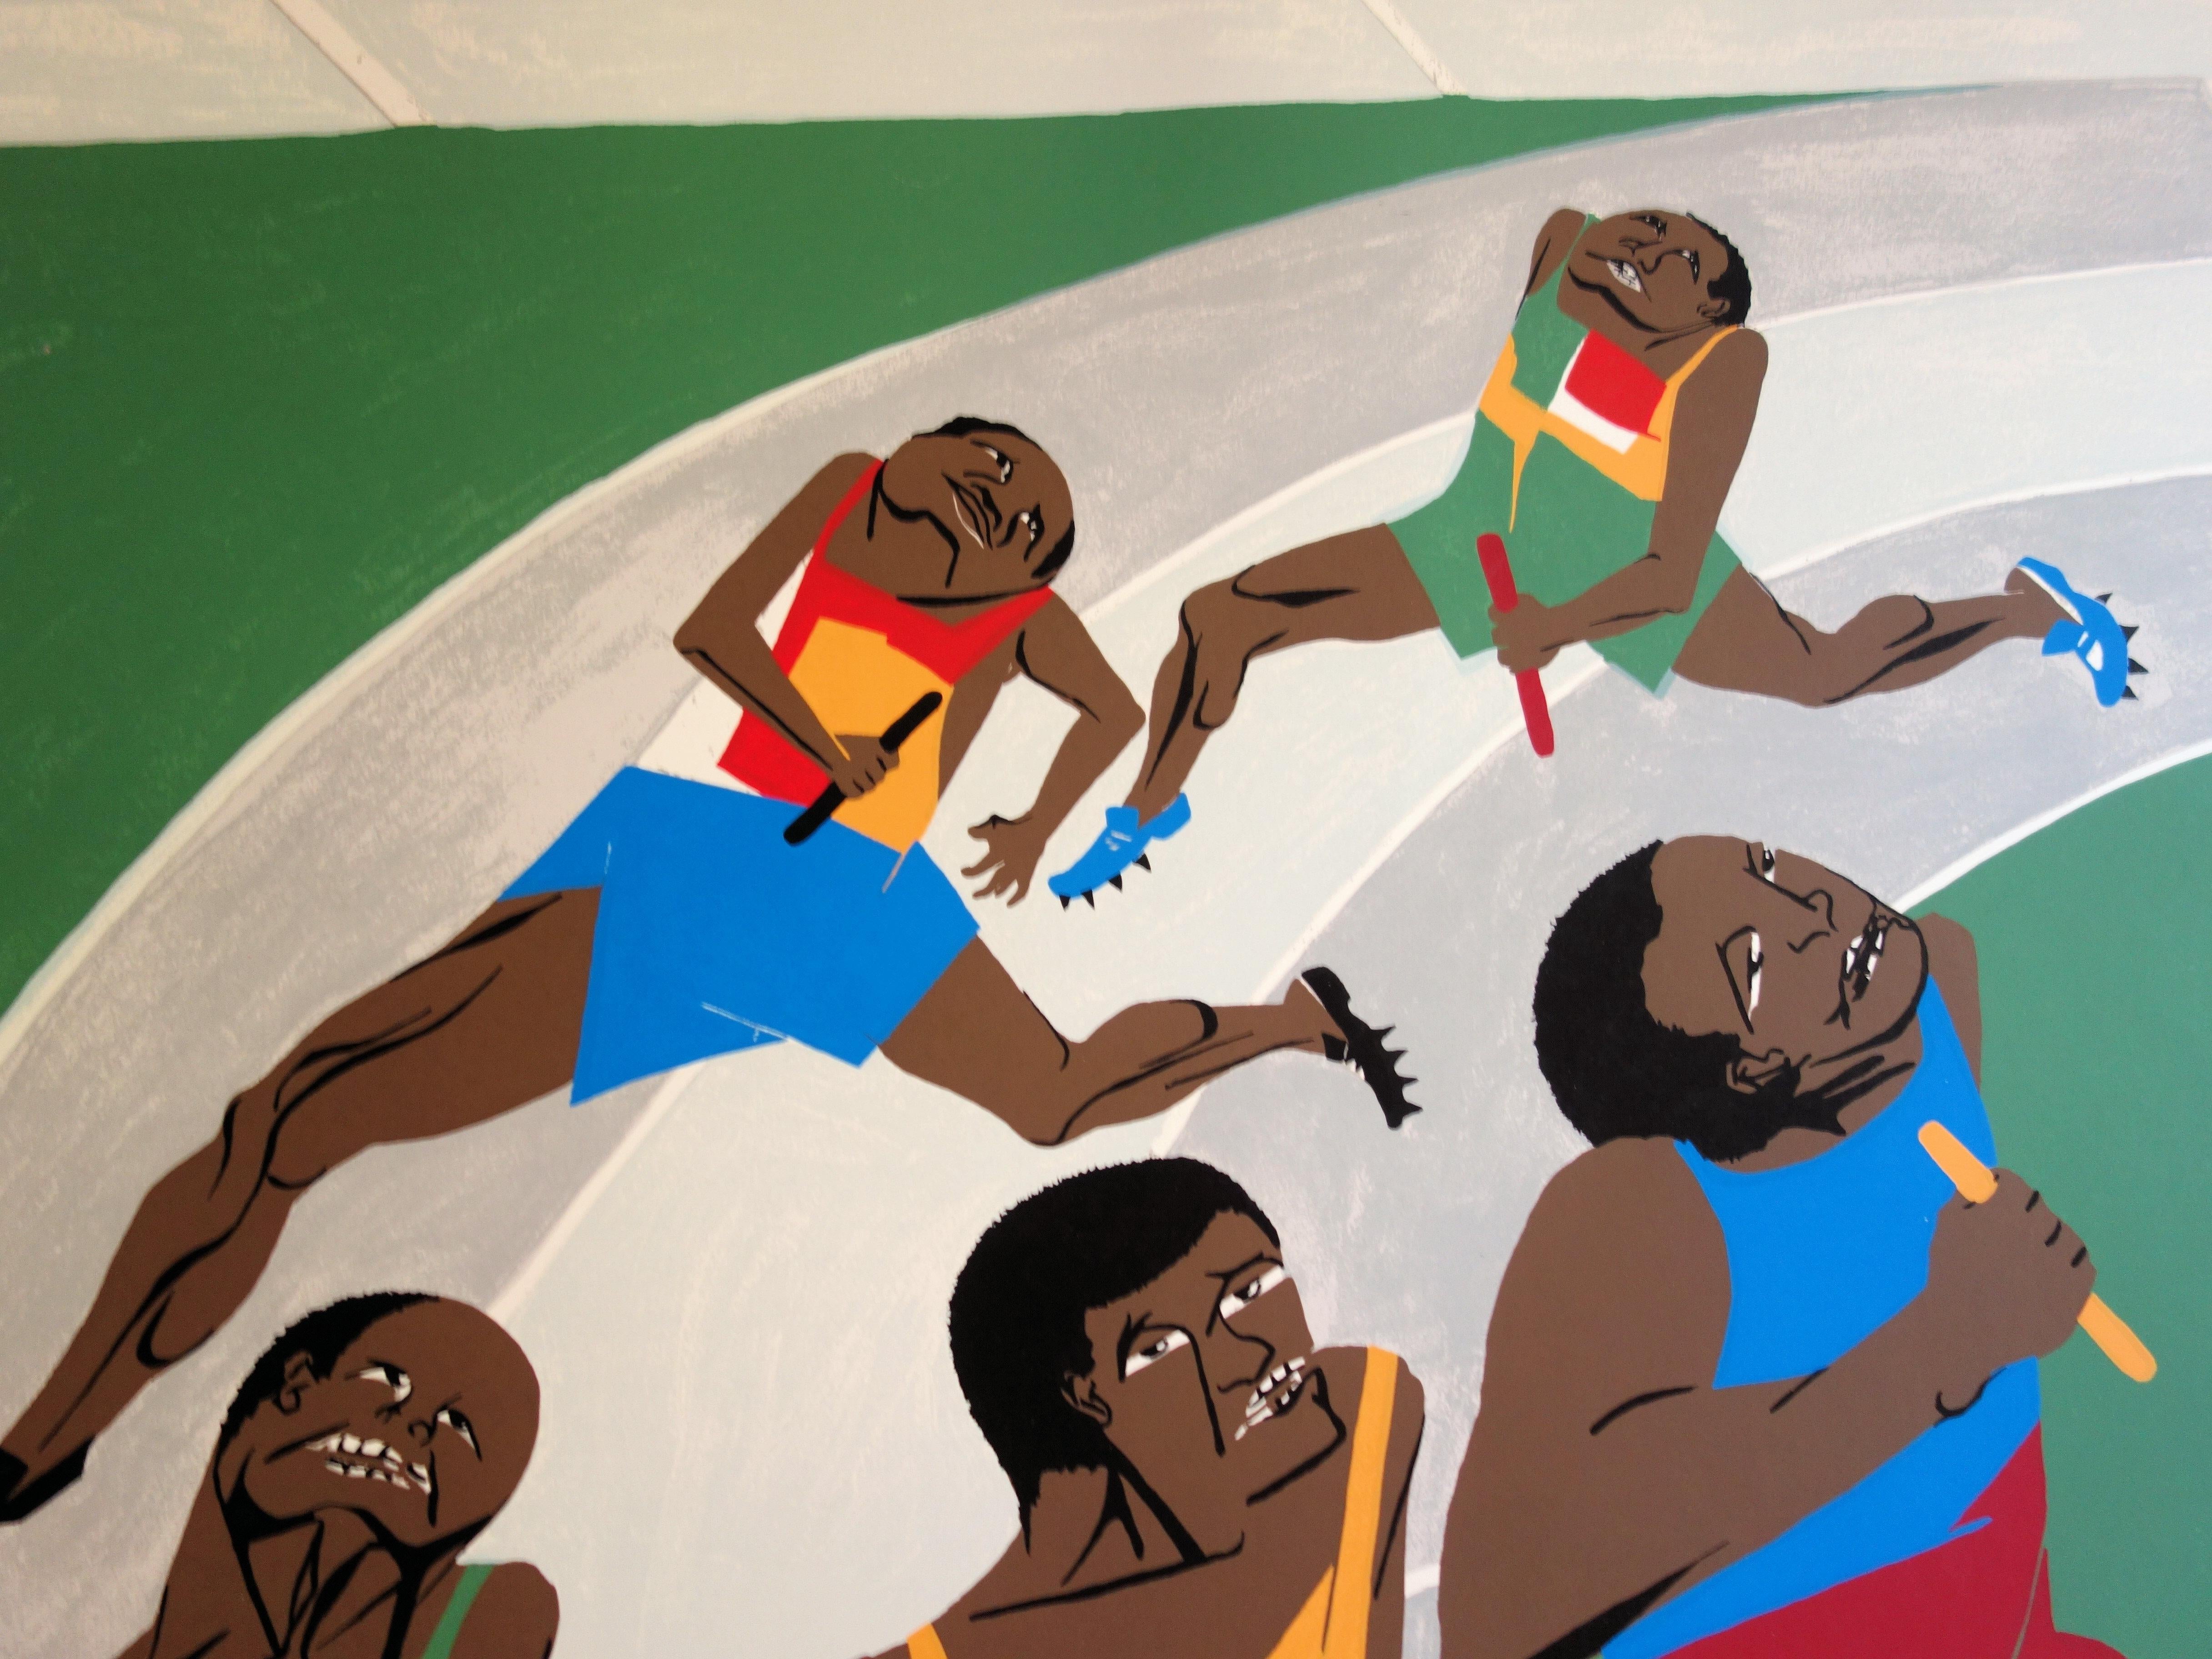 The Relay Race : Passing the Baton  - Lithograph (Olympic Games Munich 1972) - Modern Print by Jacob Lawrence